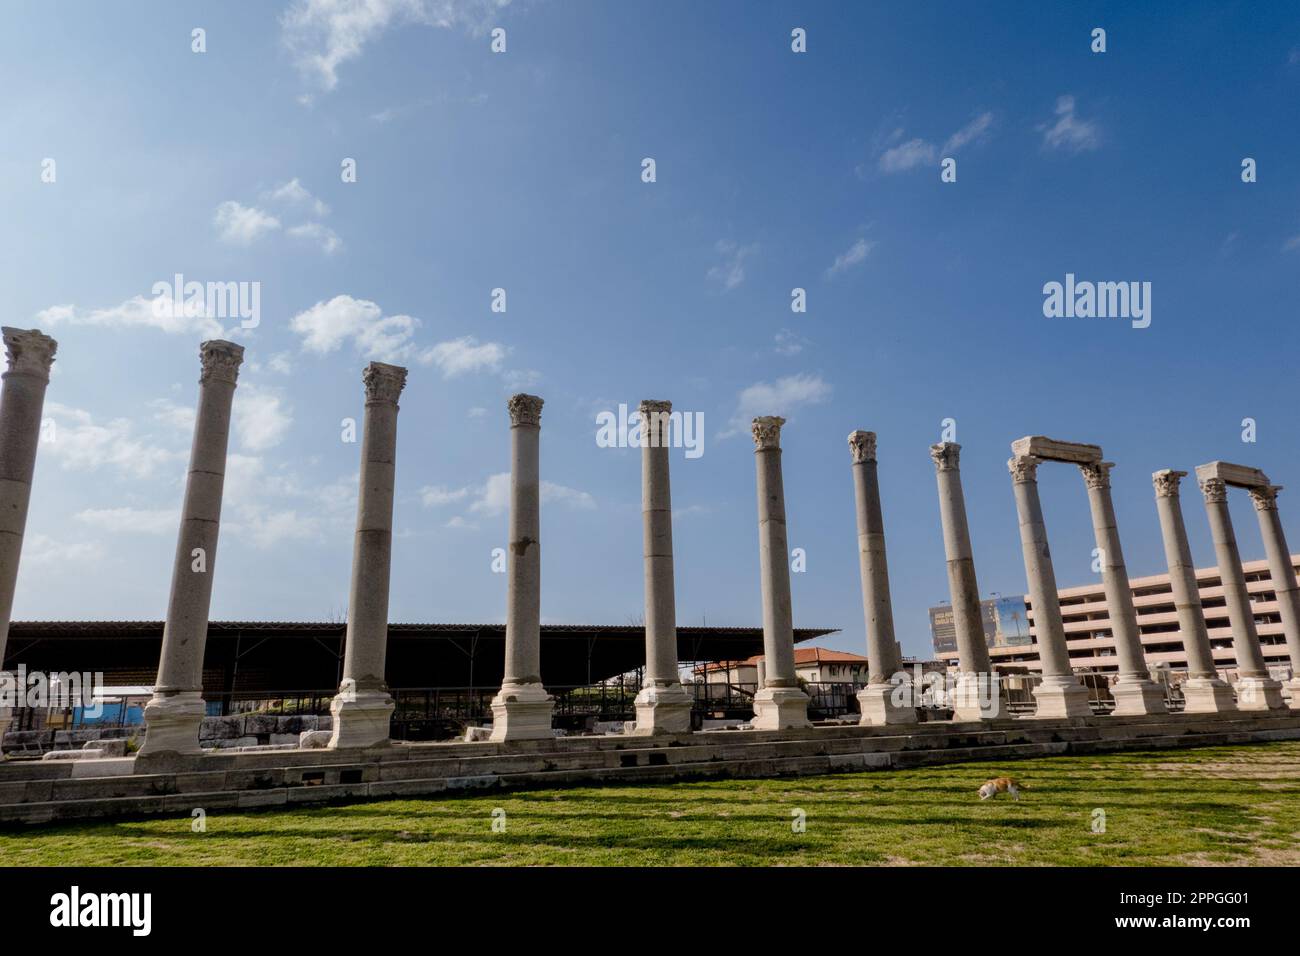 Agora Ören Yeri in Izmir, Turkey is a magnificent ancient site that showcases the remnants of a once-great marketplace and cultural hub. Stock Photo